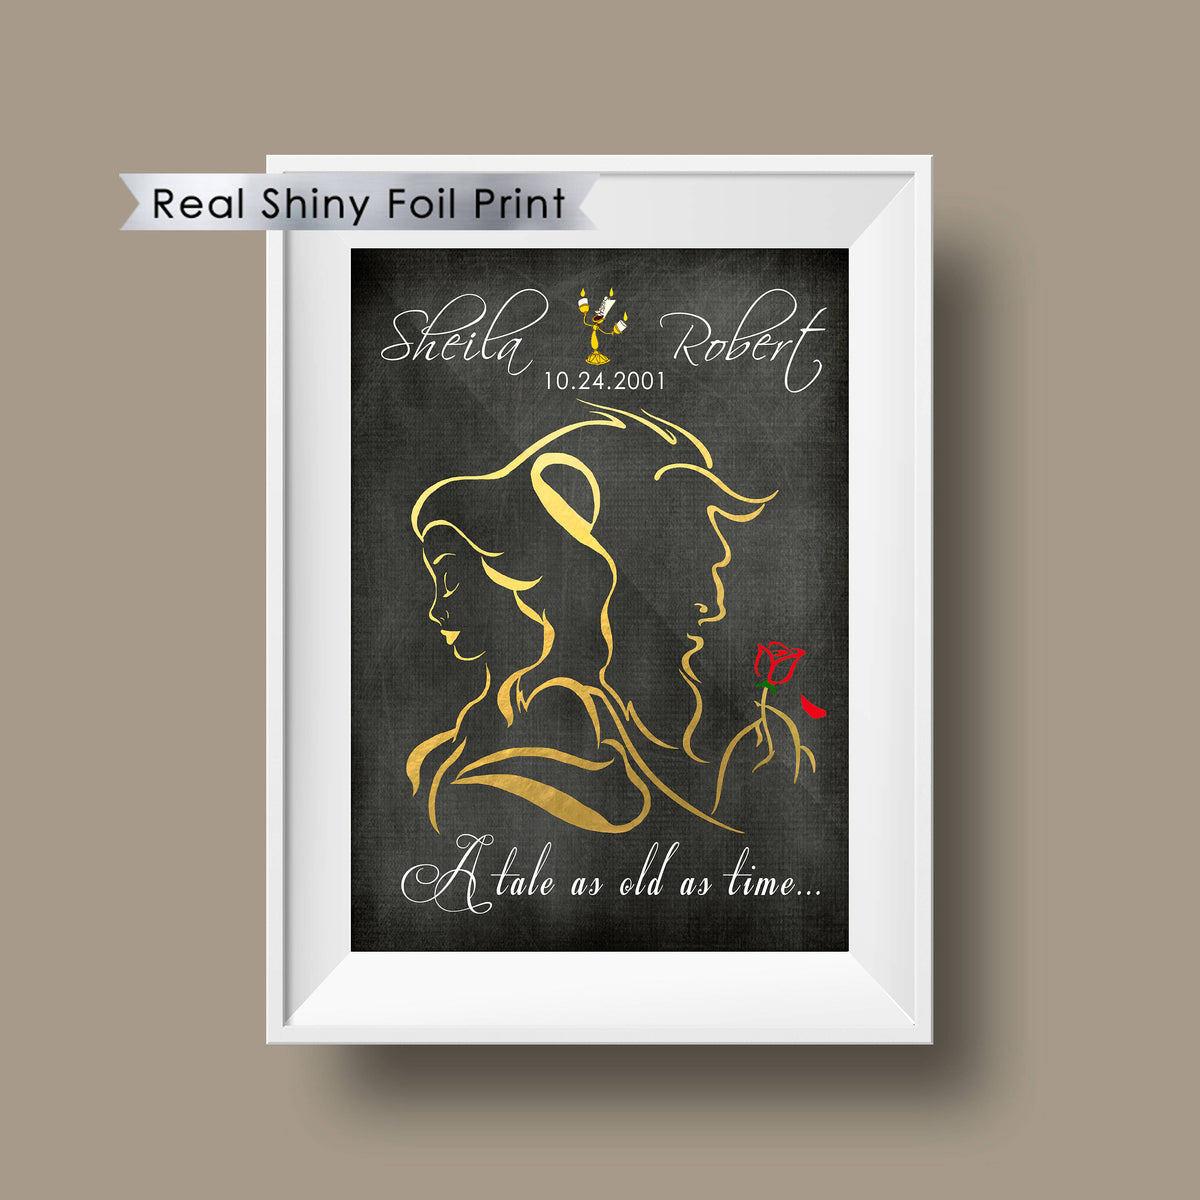 Beauty and the Beast, Tale As Old As Time Song Lyrics, Belle and Beast  Disney Wedding Gift, Personalized Gift